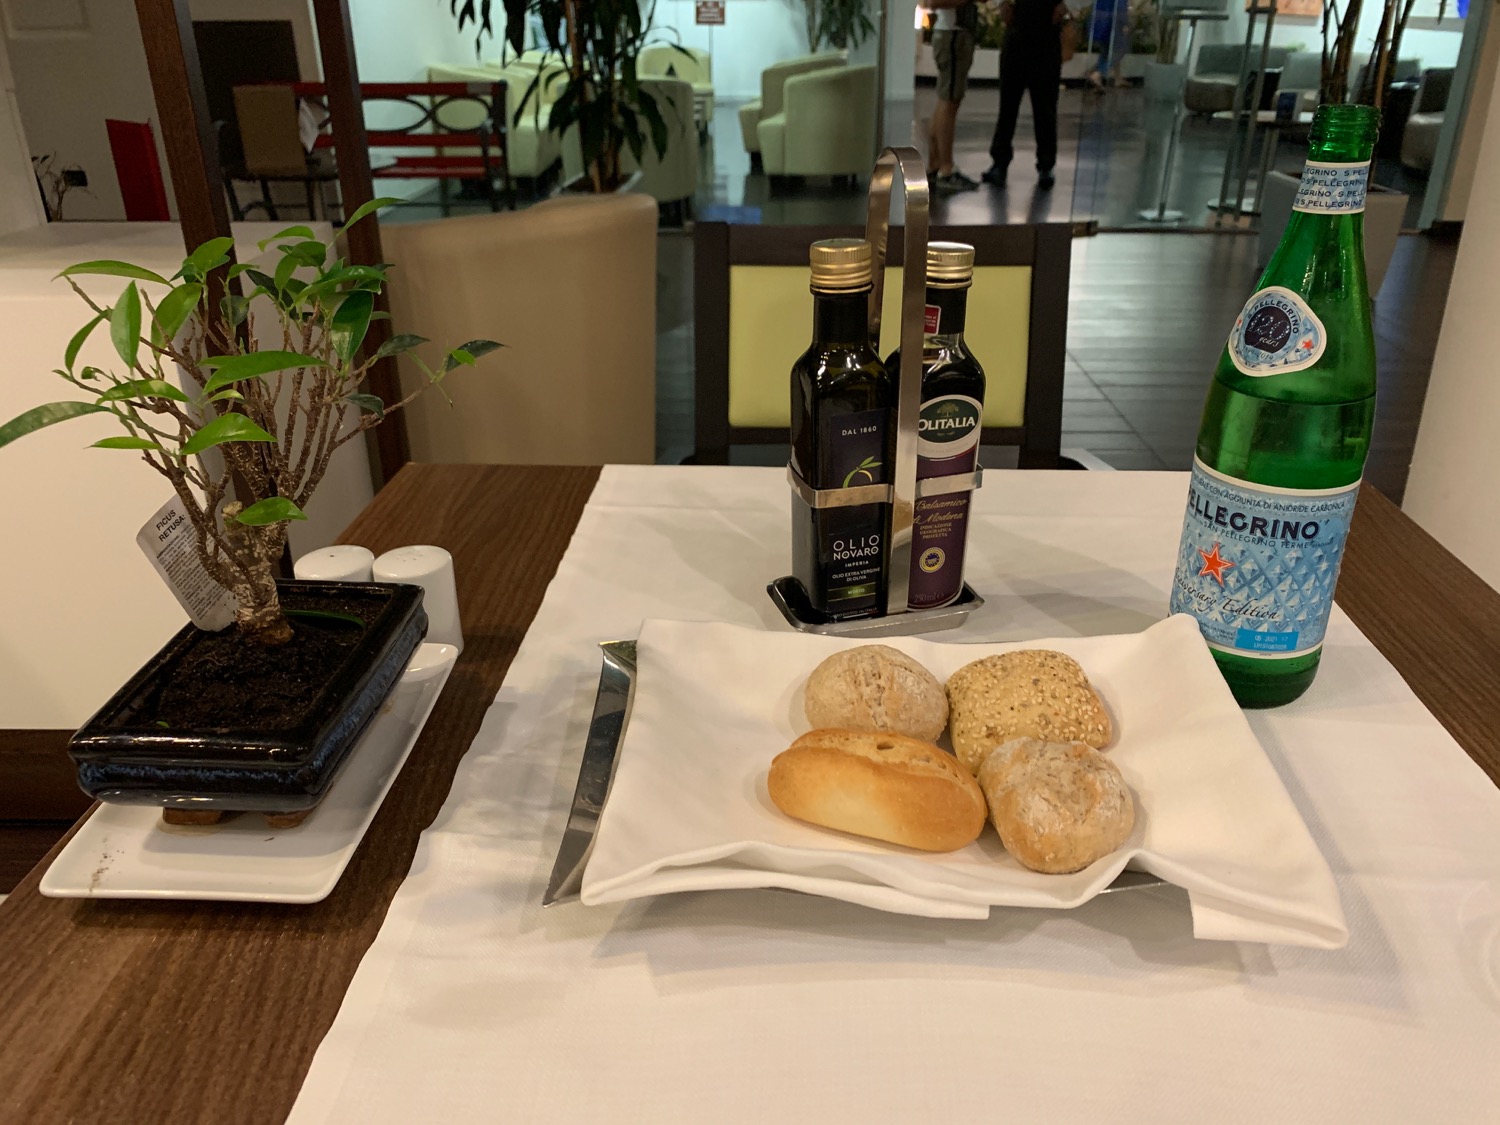 a plate of bread and bottles of beer on a table